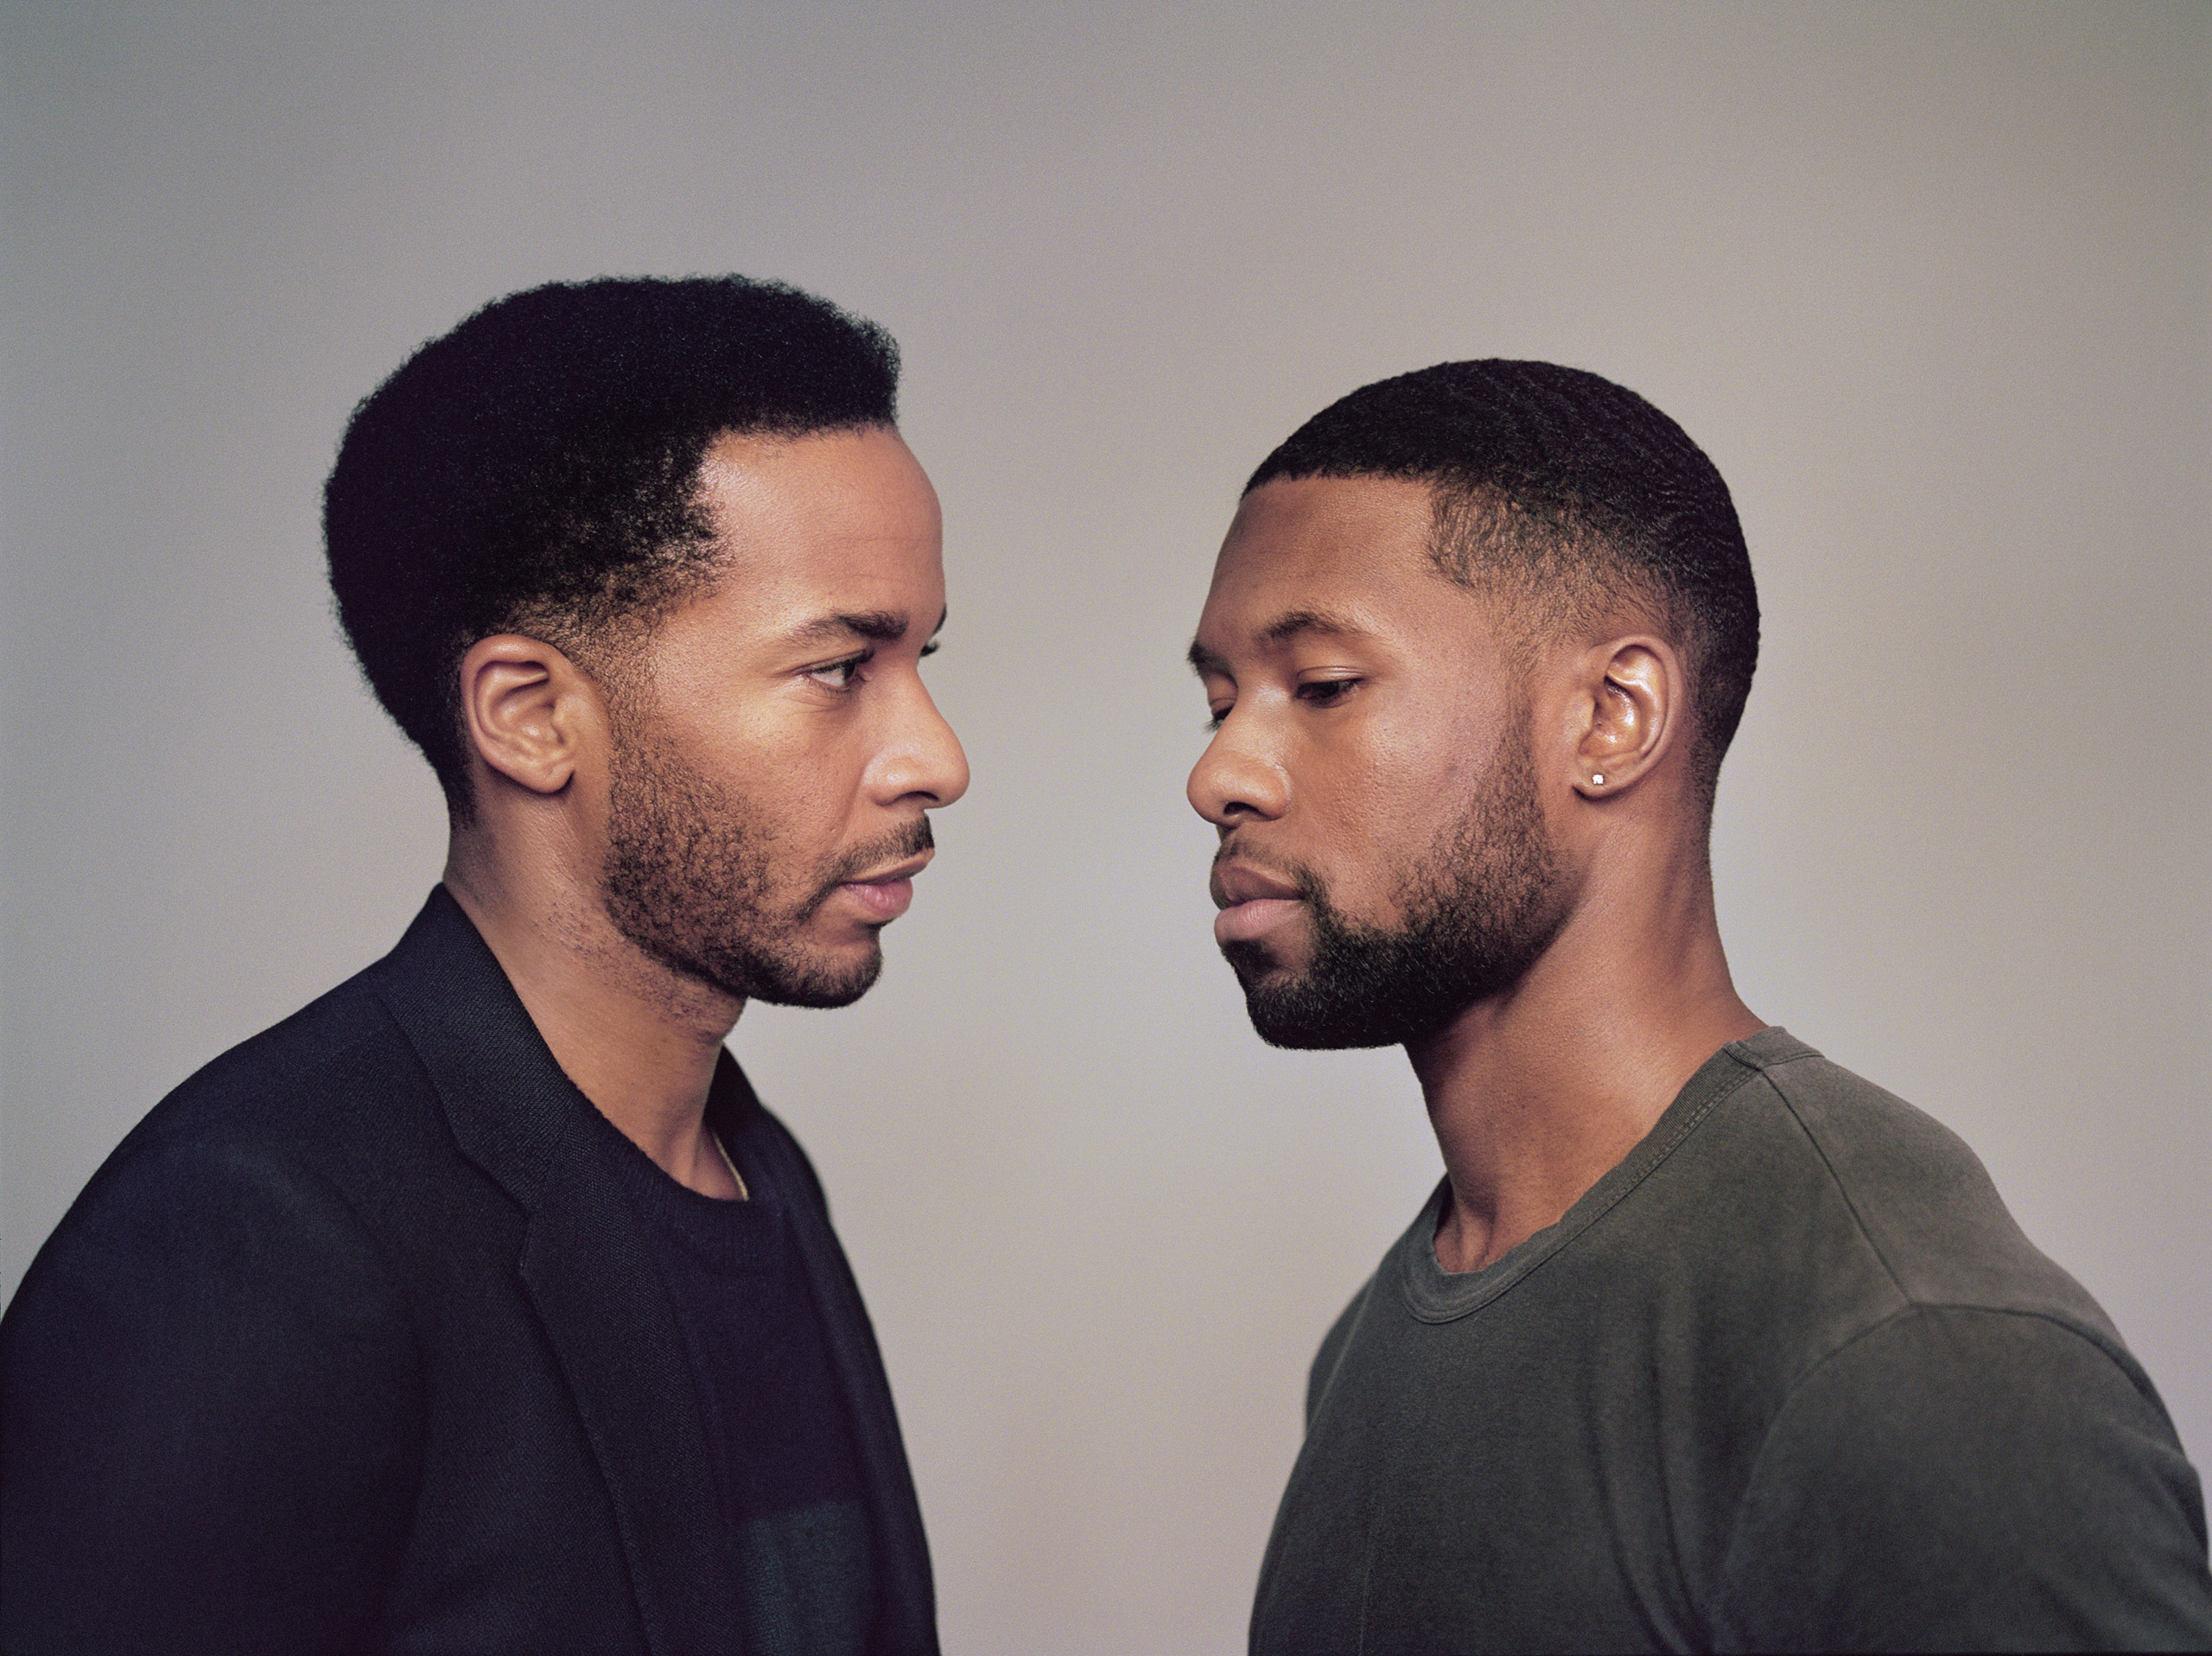 Actors André Holland, left, and Trevante Rhodes photographed in New York City on Oct. 20, 2016.From  The Best of Culture 2016.  Dec. 19, 2016 issue.